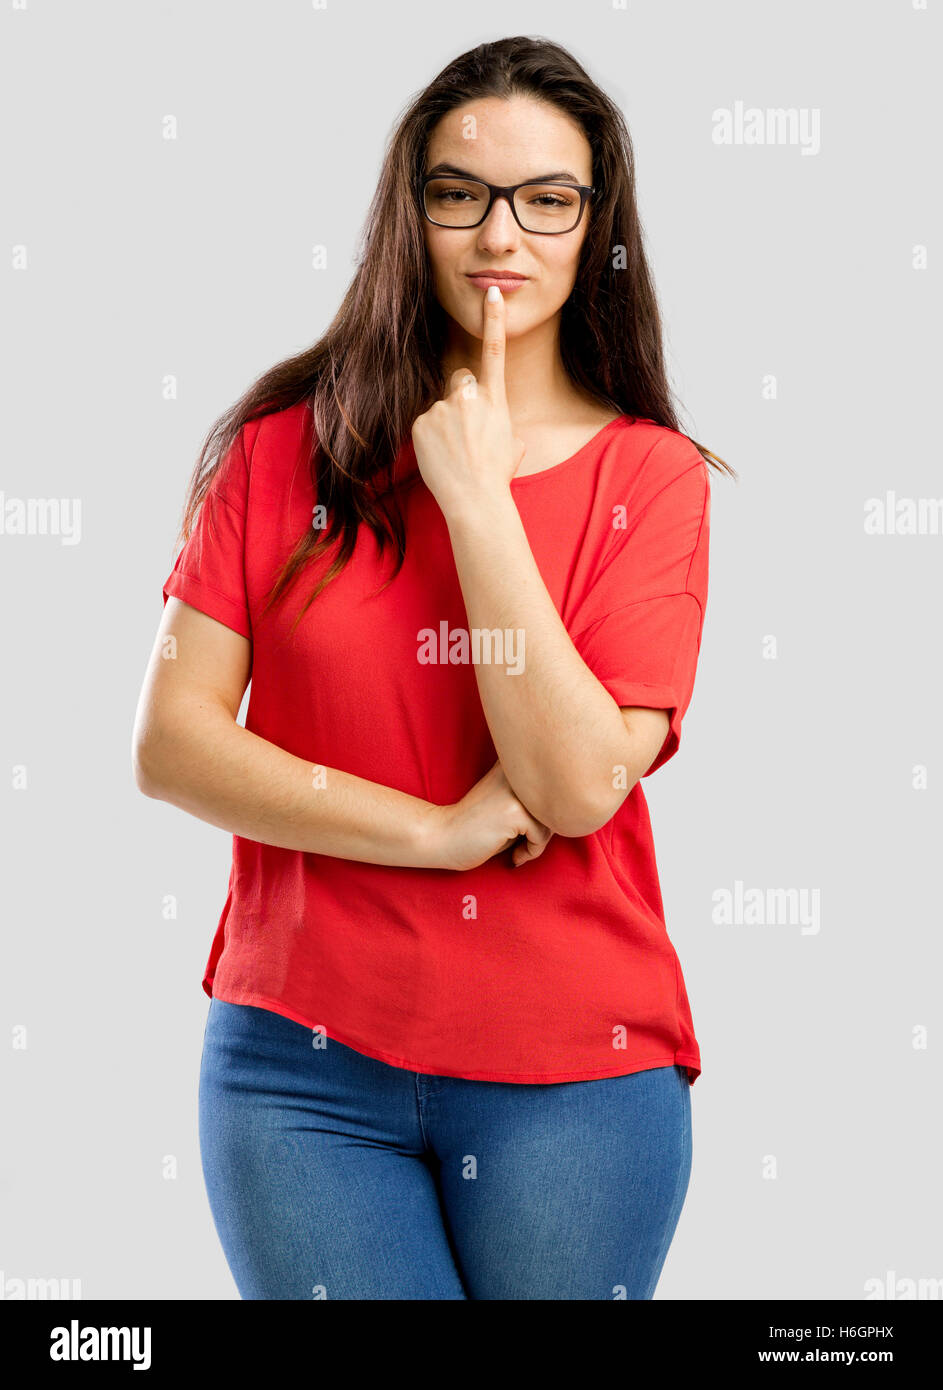 Beautiful and lovely woman making a thinking expression Stock Photo